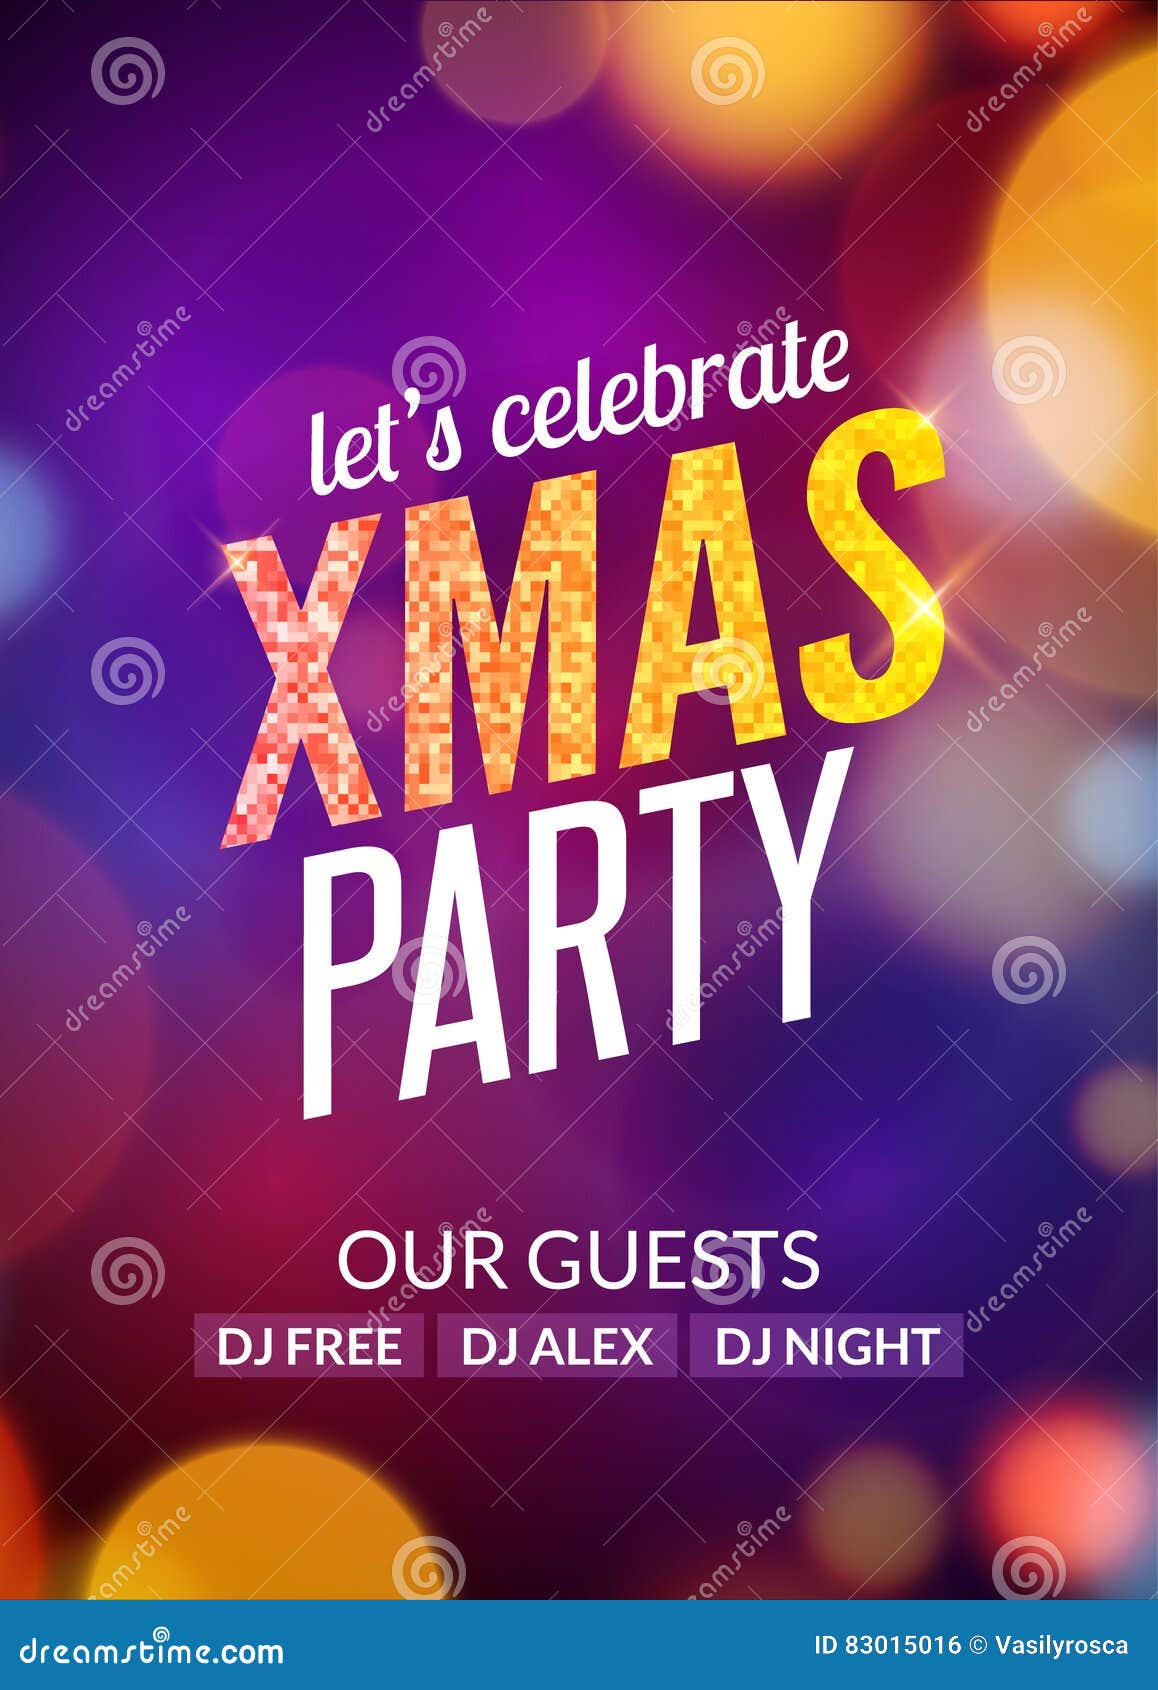 Free xmas party psd flyer template download free flyer for photoshop.